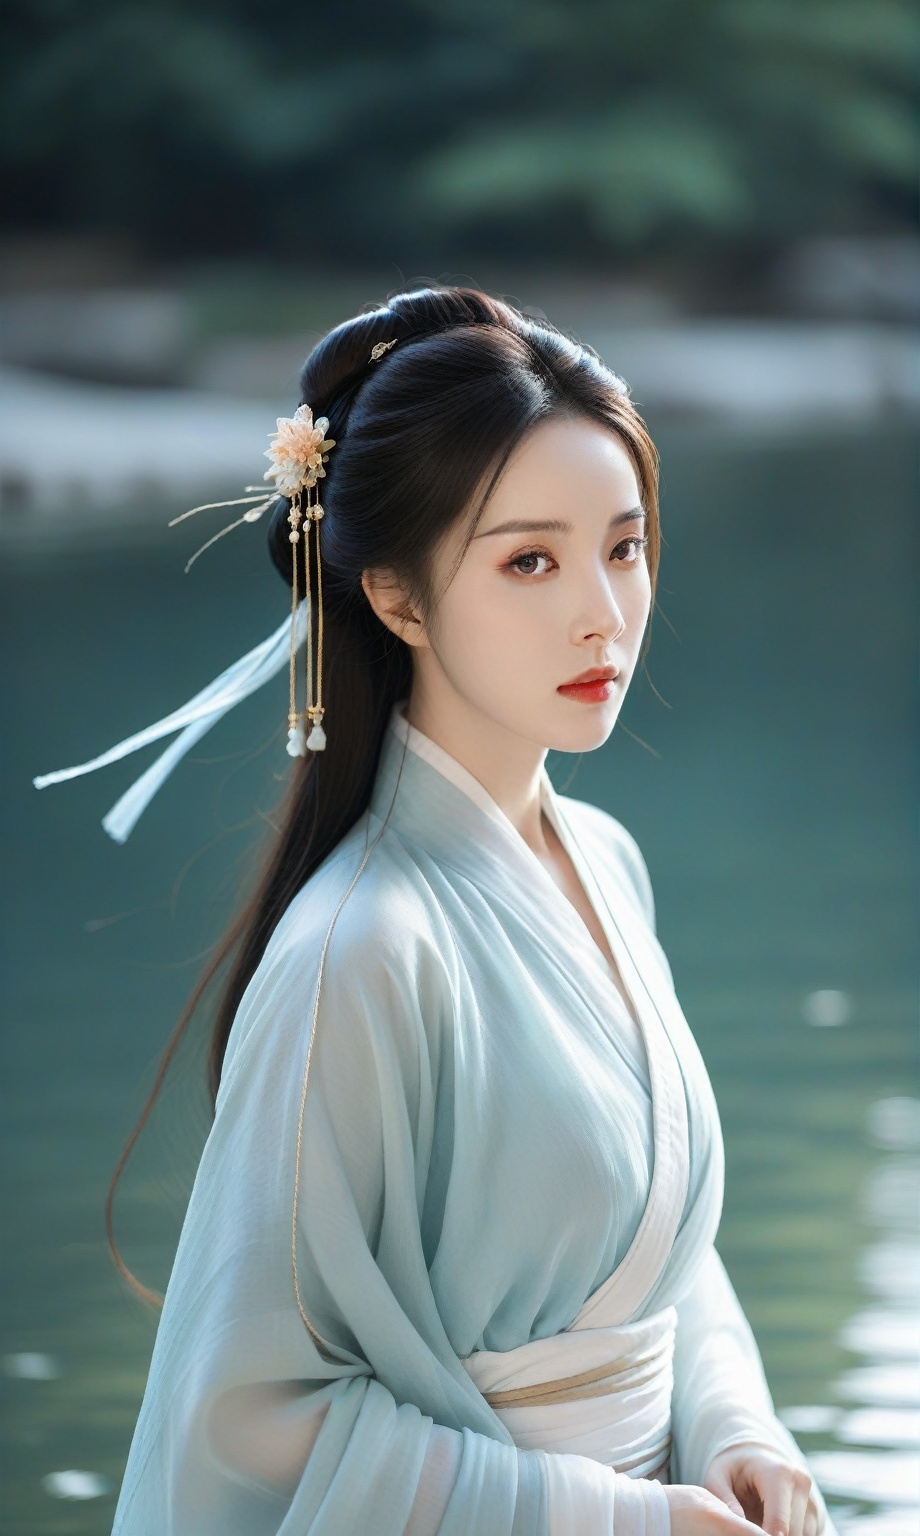 a woman, hanfu, the woman's gaze is directed slightly to her right, her lips are slightly parted, and her eyes are focused intently. the hanfu is flowing gracefully, with the light blue fabric draping elegantly around her. the background showcases a serene body of water, and the overall mood of the image is calm and contemplative.